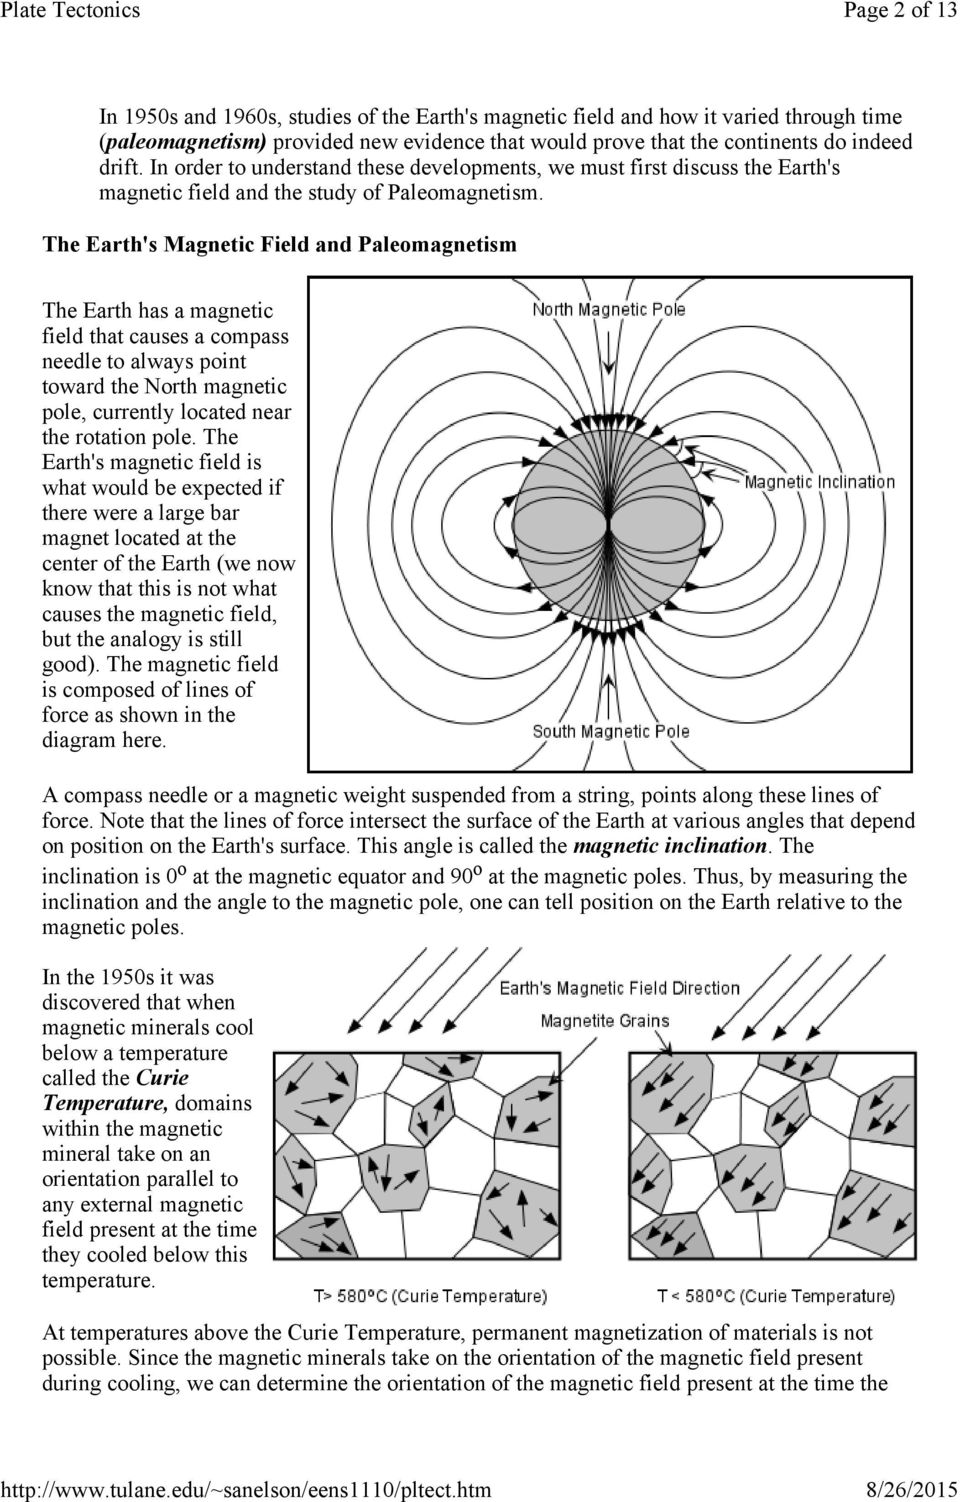 The Earth's Magnetic Field and Paleomagnetism The Earth has a magnetic field that causes a compass needle to always point toward the North magnetic pole, currently located near the rotation pole.